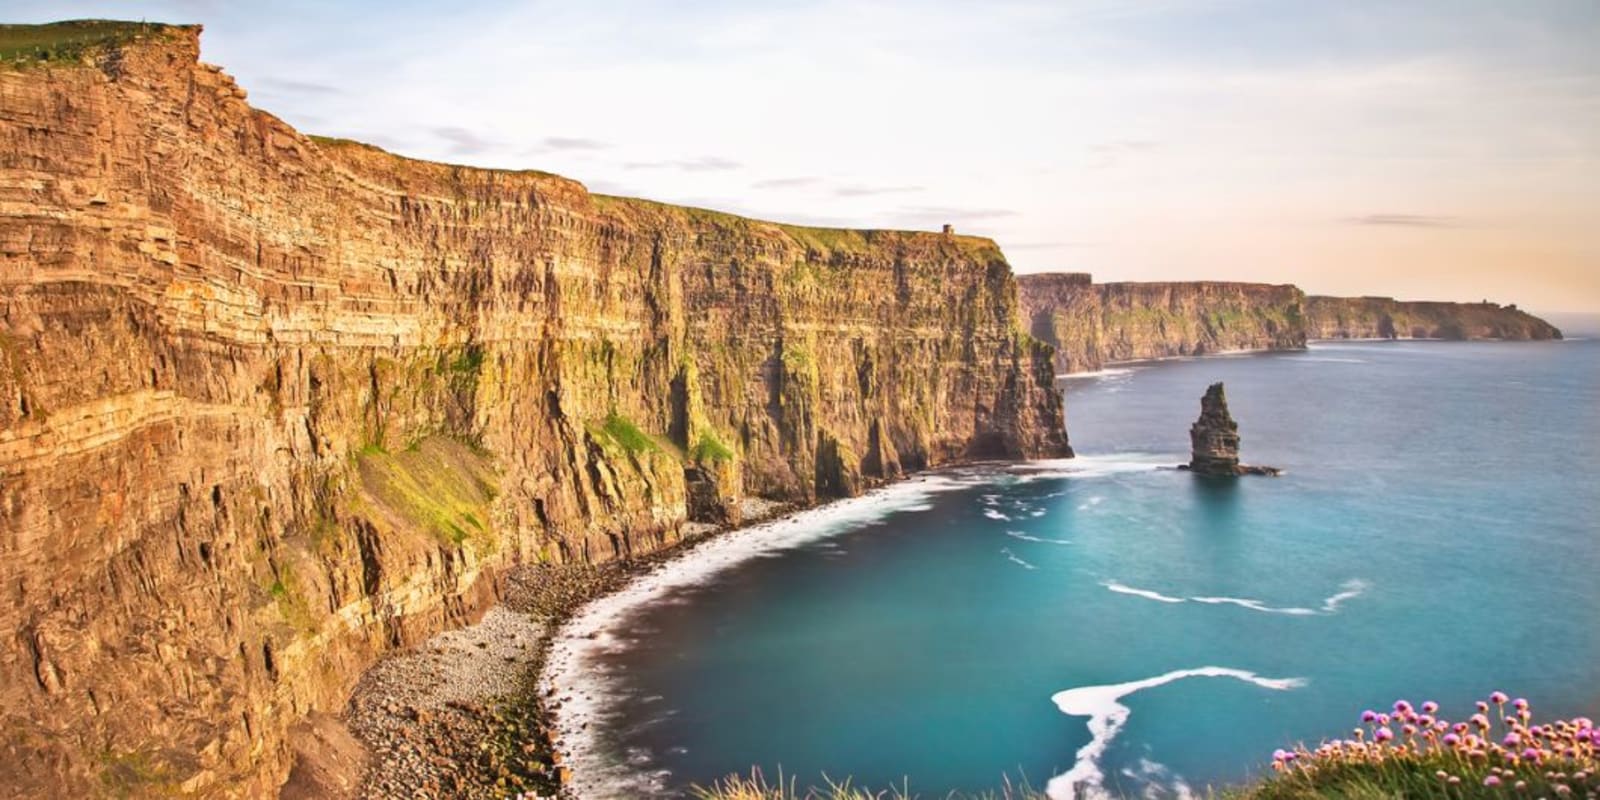 The cliffs of Moher in Ireland